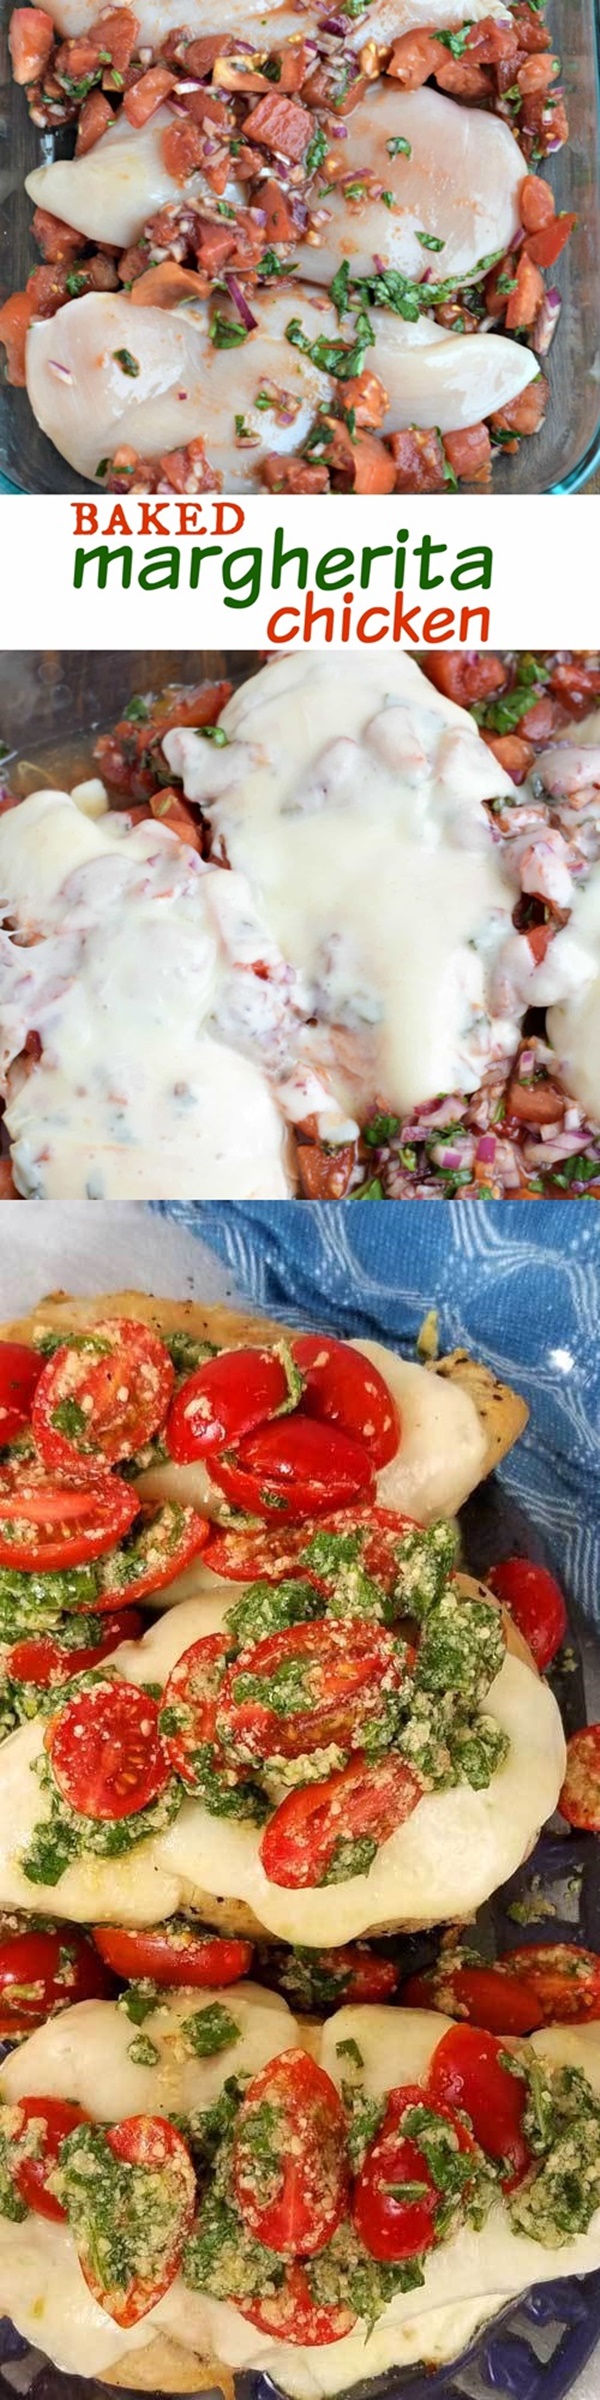 Delicious Dinners Ideas That Come Together In 30 Minutes